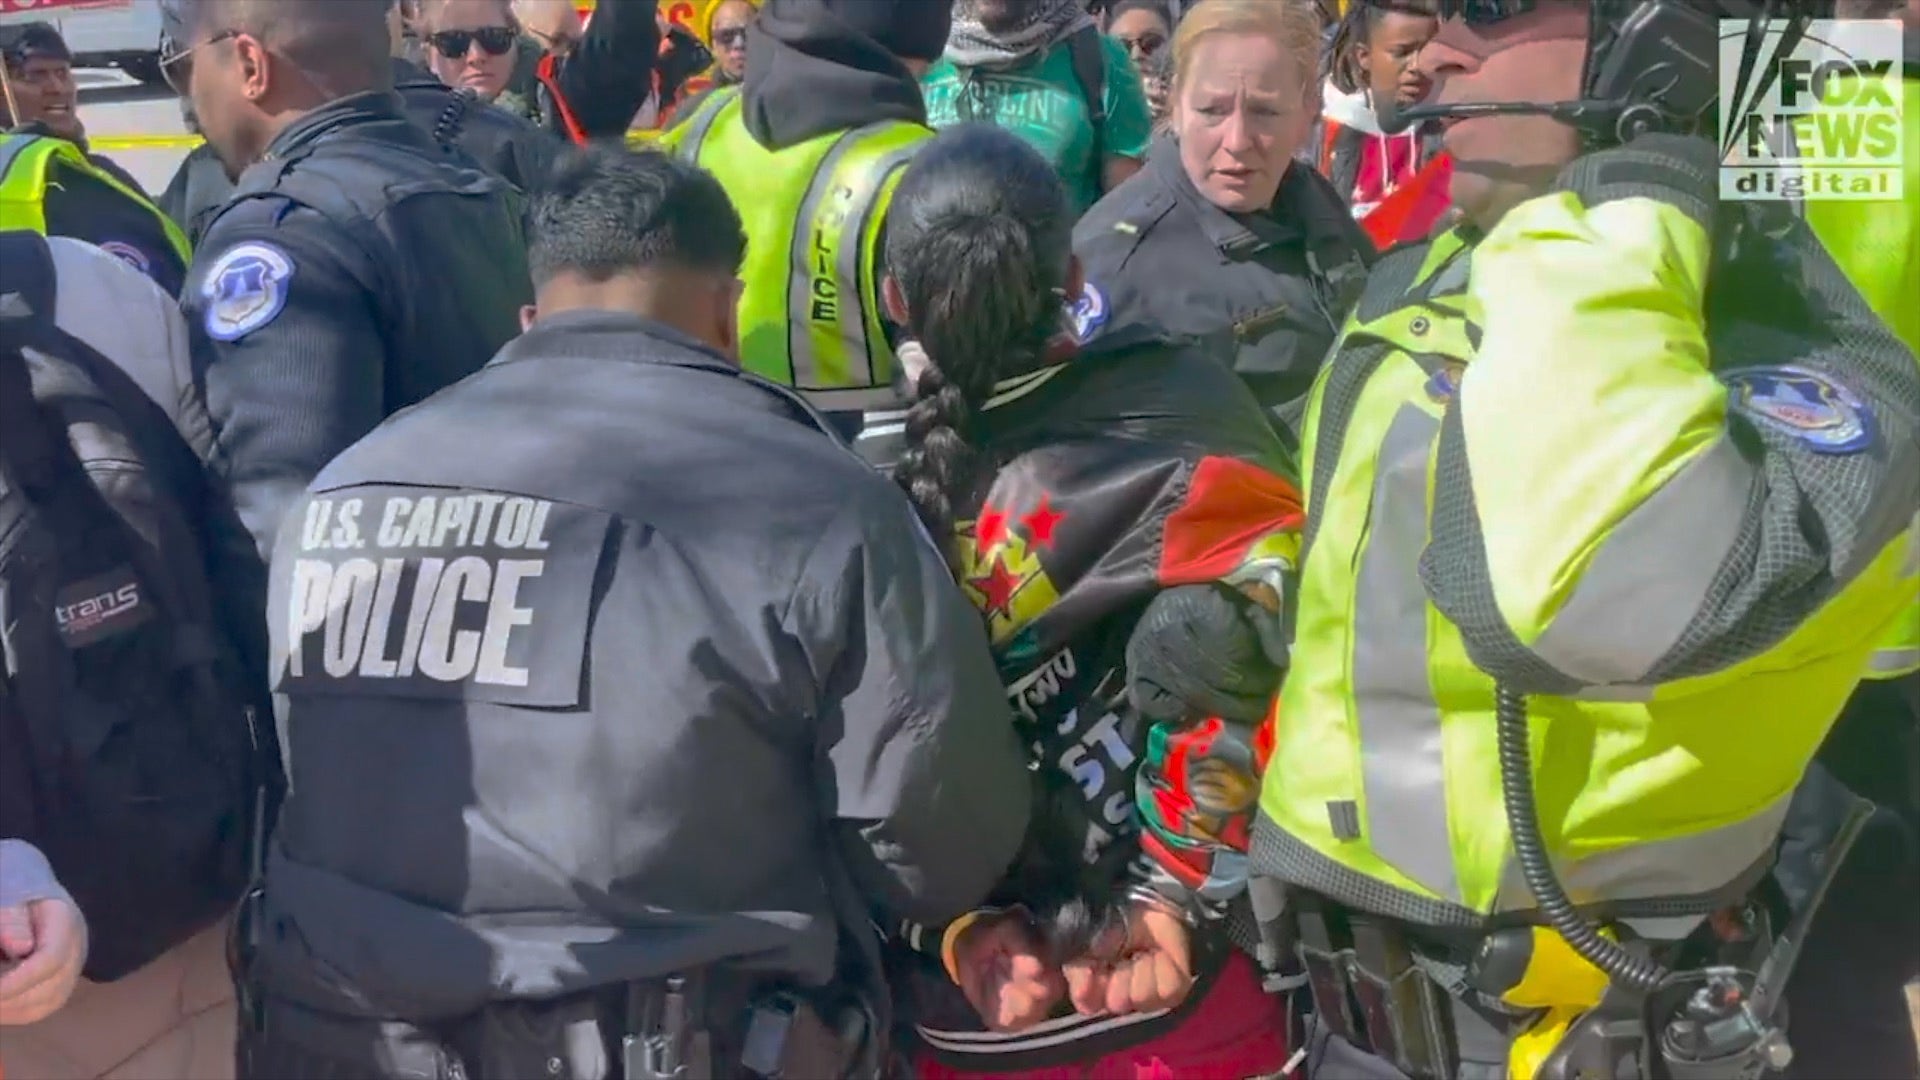 Protester arrested as demonstrators confront police at D.C. statehood rally ahead of Senate vote on crime bill